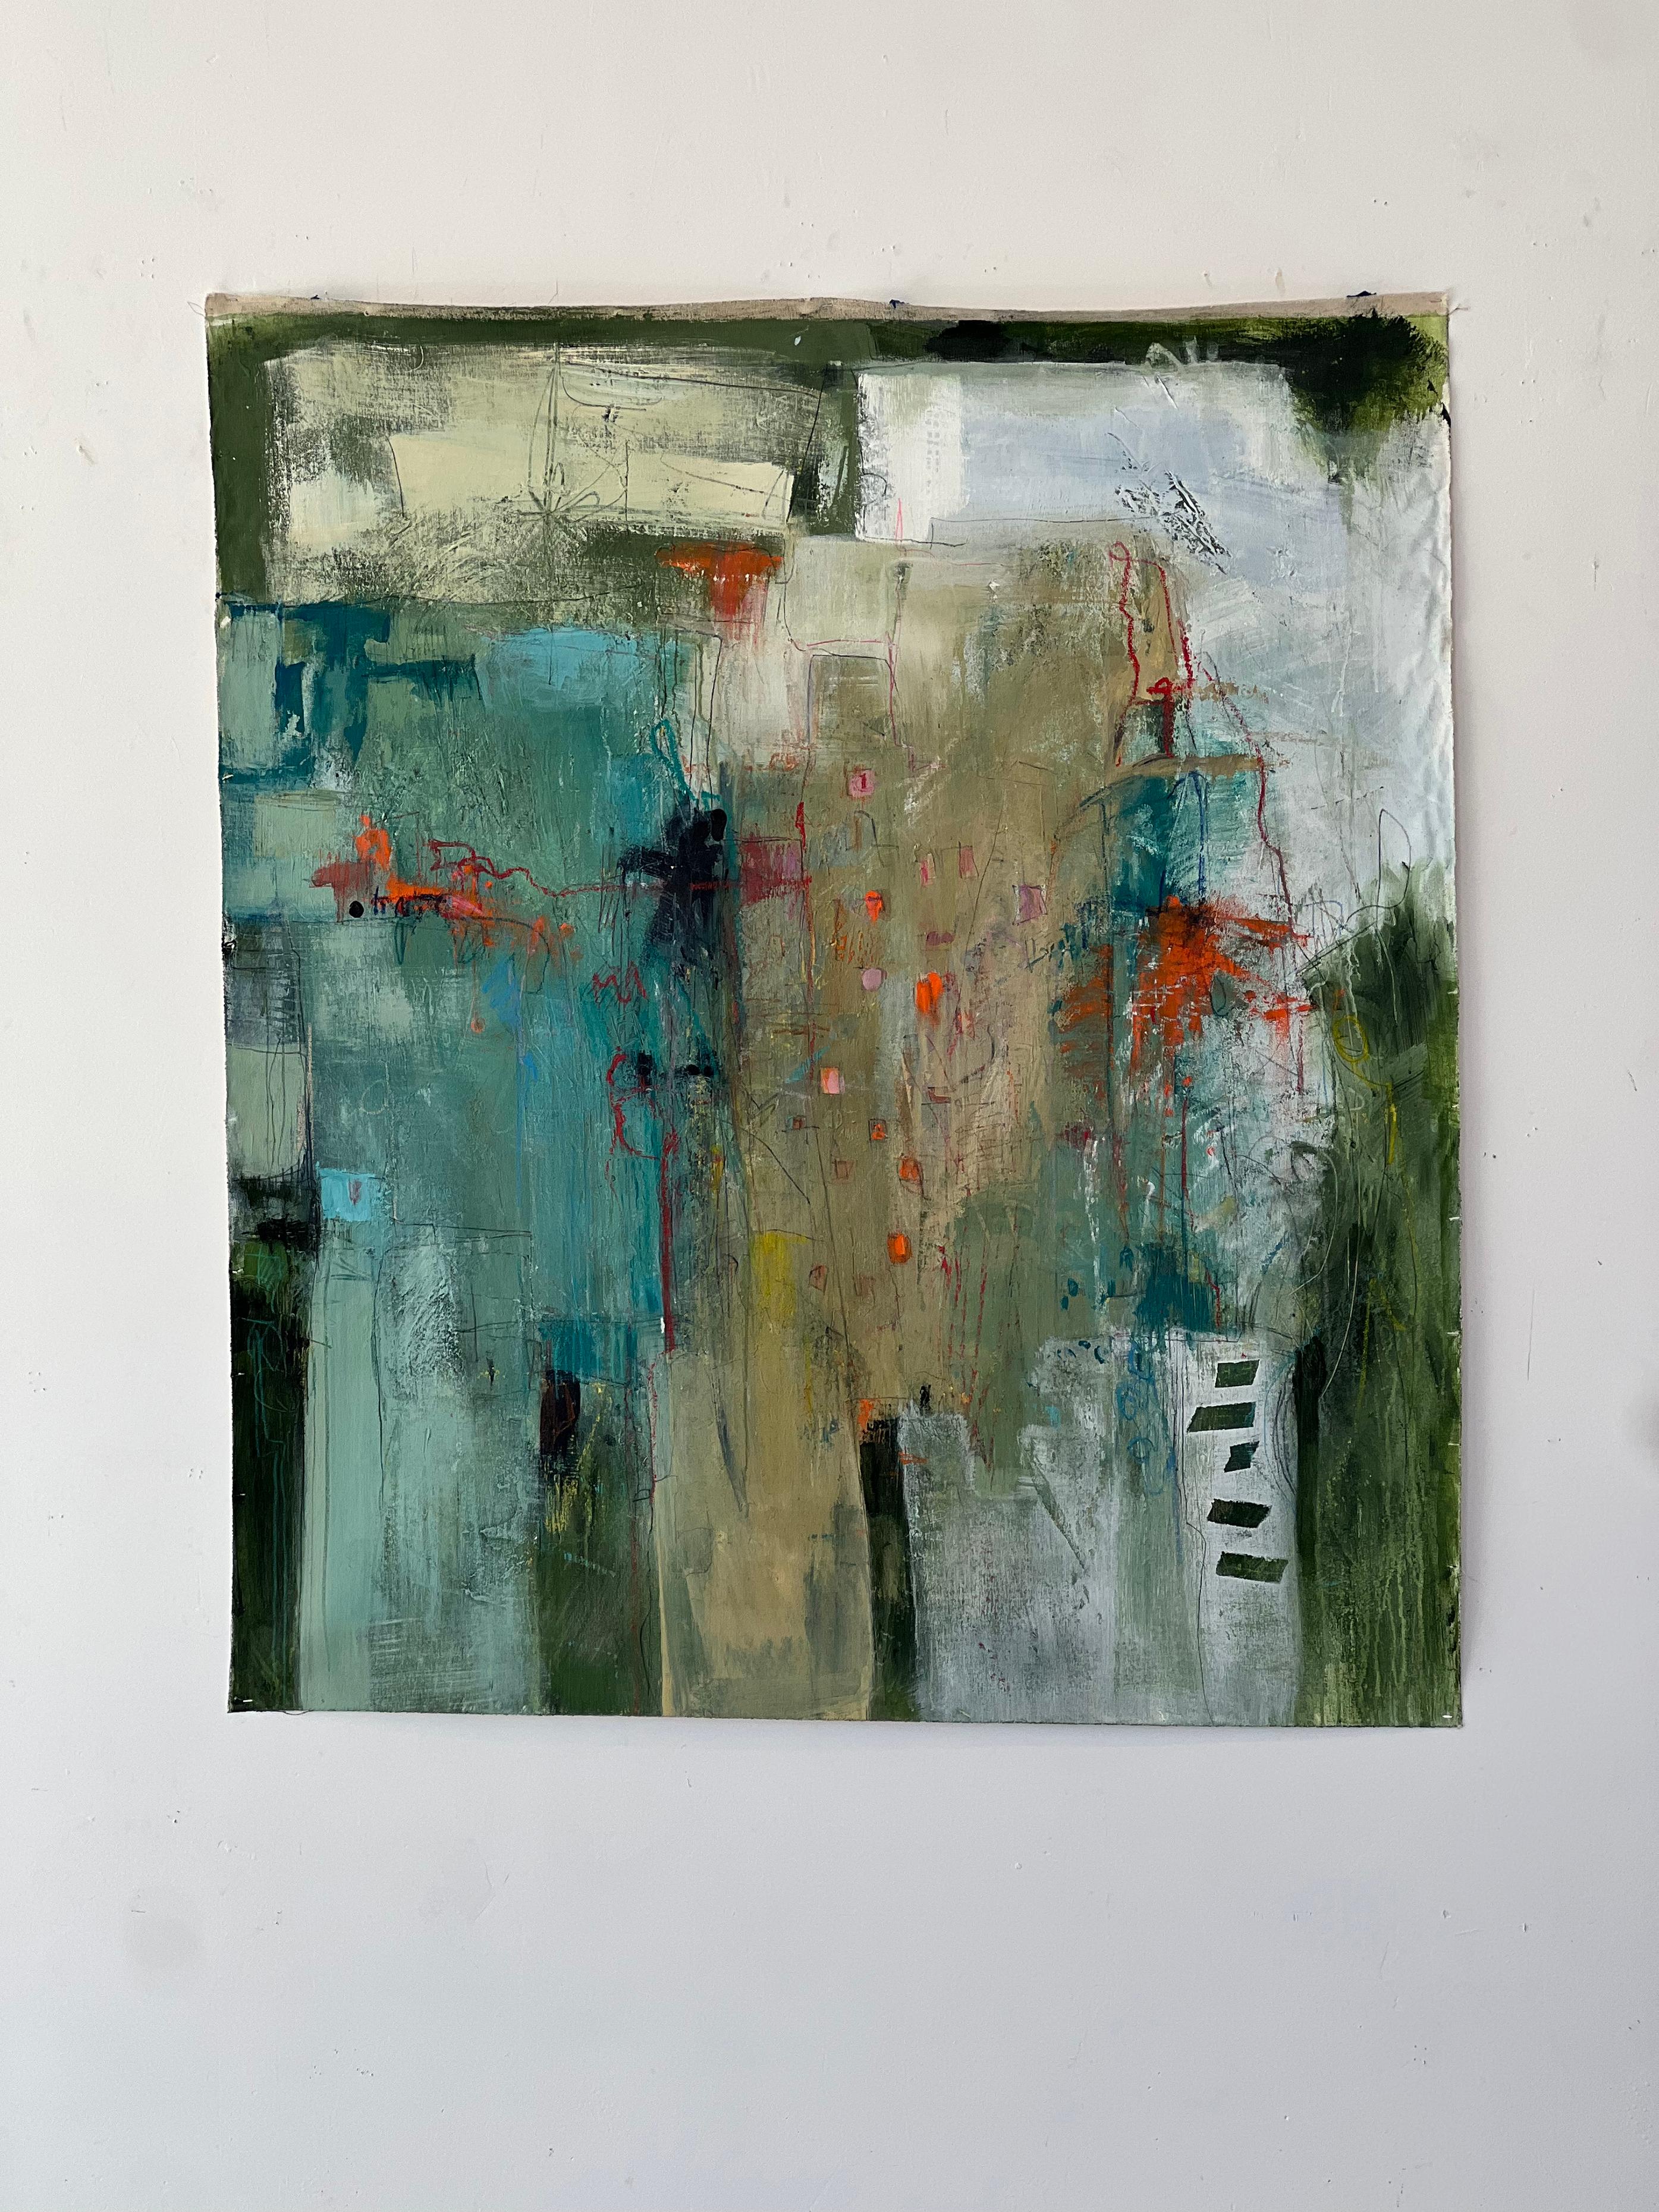 Montreat Series: Untitled #3- acrylic on canvas - Abstract Painting by Stephanie Visser 